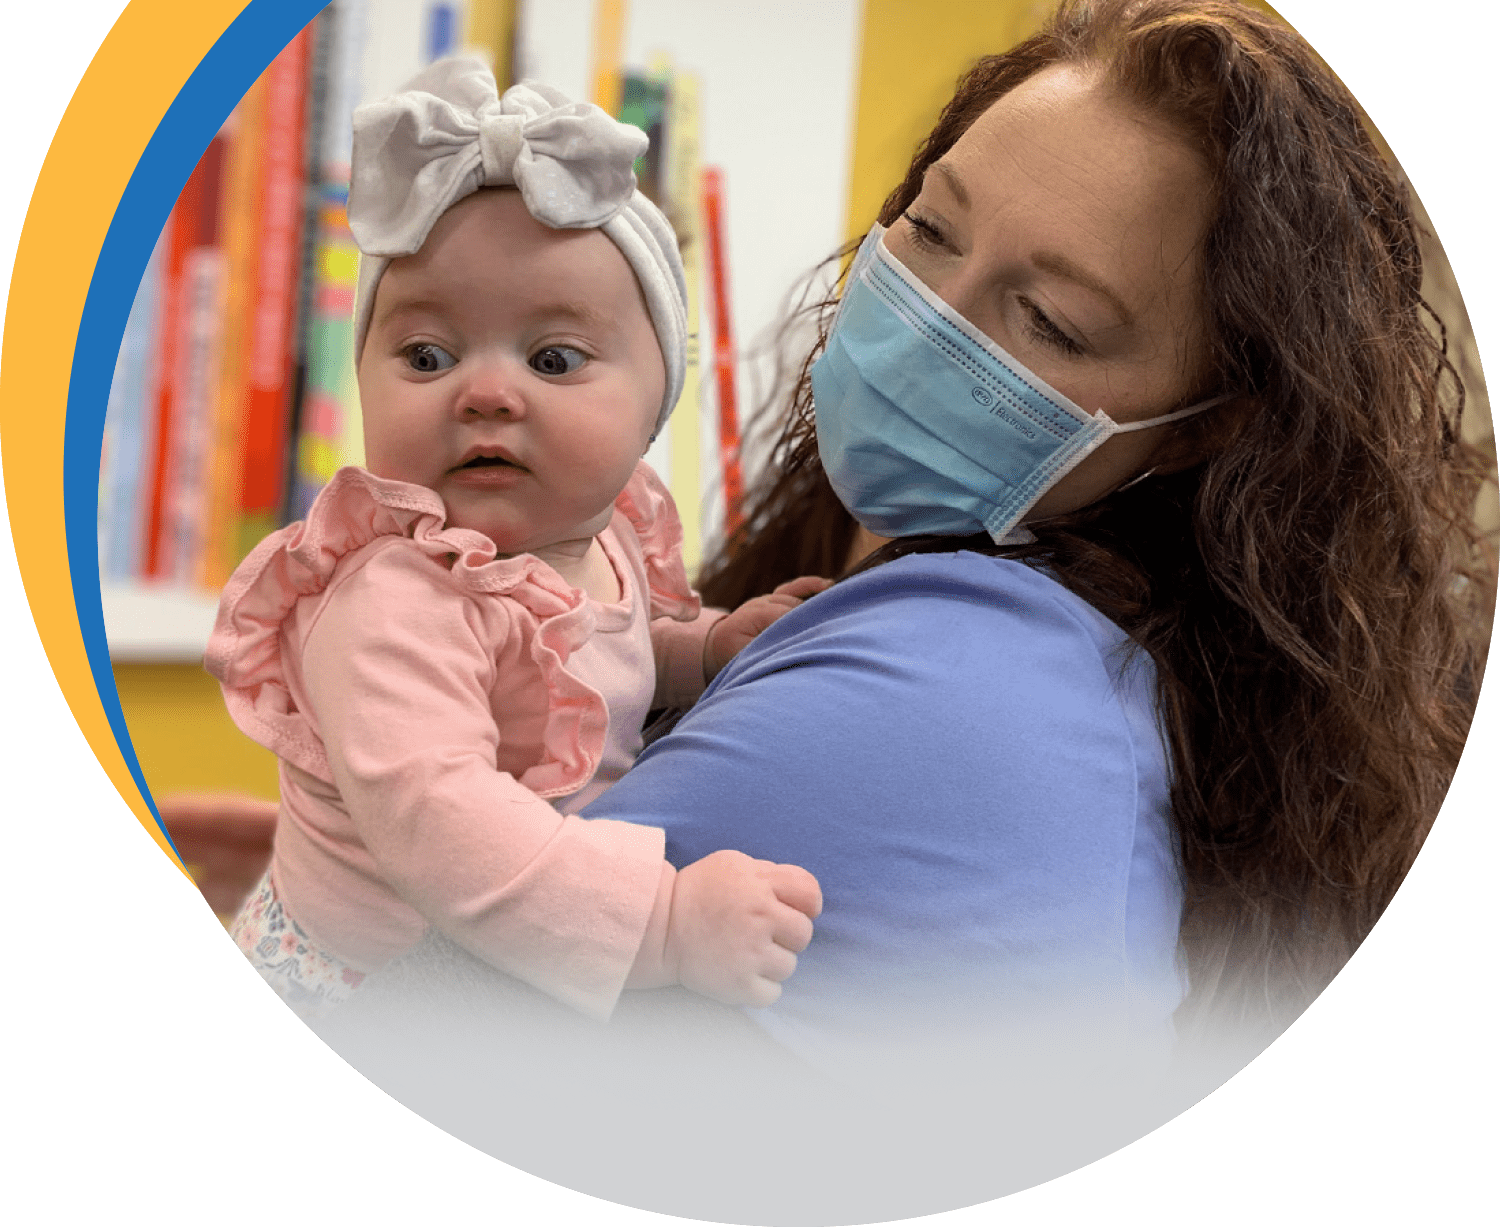 Pediatric doctor with her patient